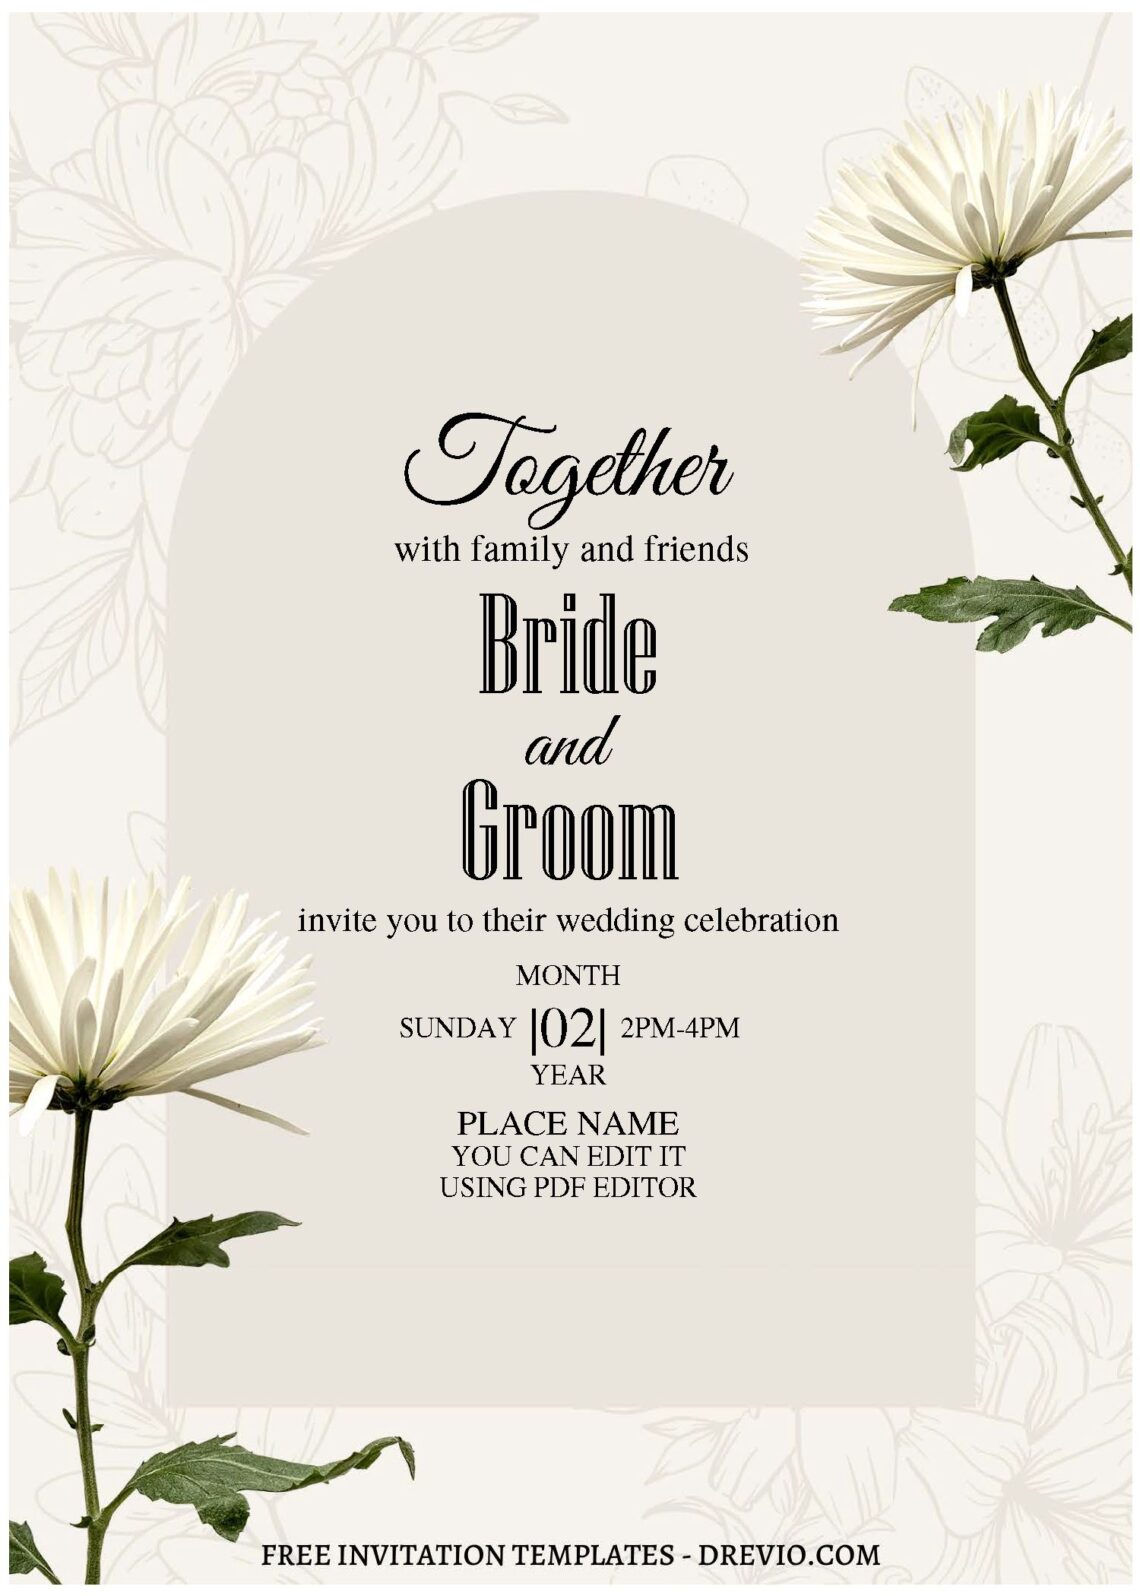 (Free Editable PDF) Whimsical Spring Garden Wedding Invitation Templates with white floral